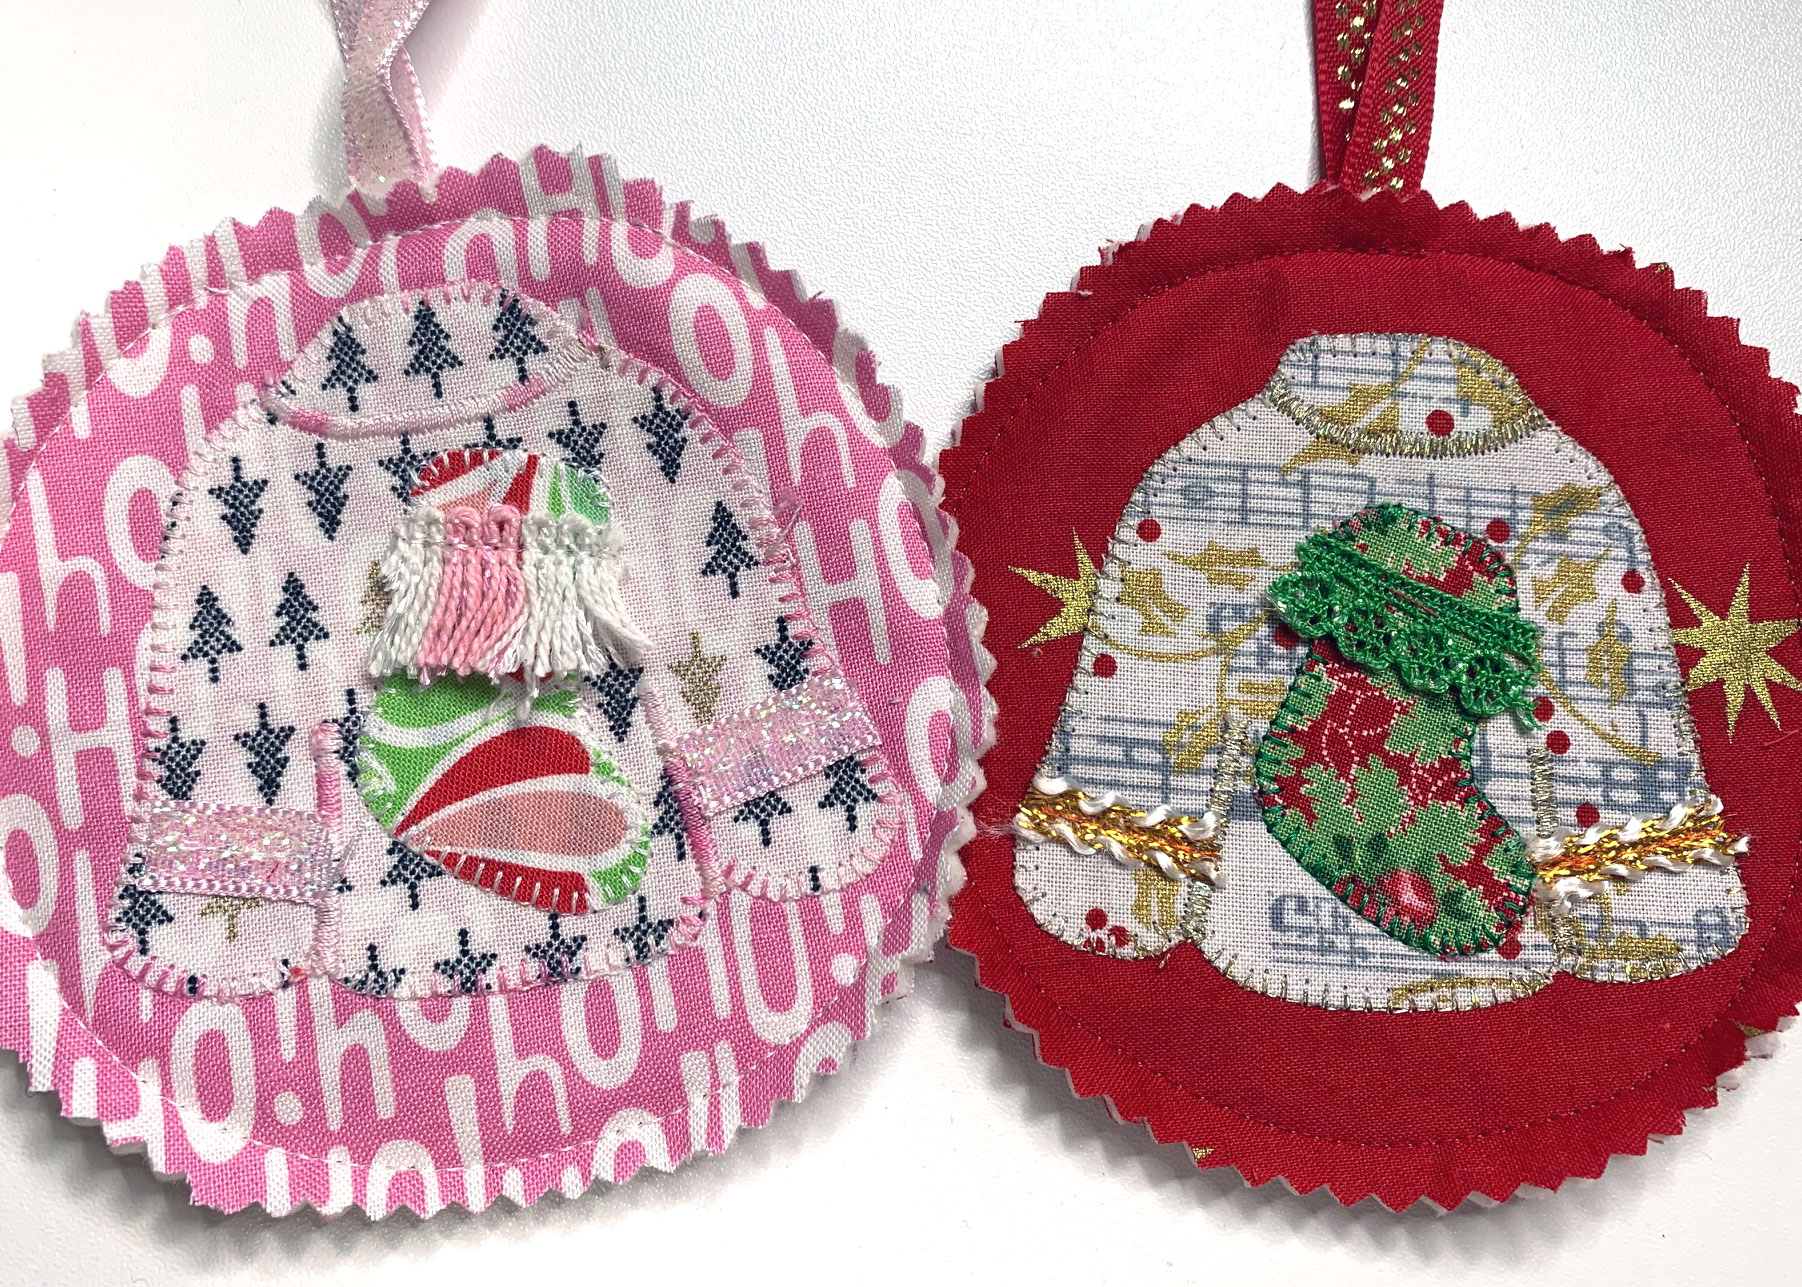 120 CHRISTMAS ORNAMENTS TO CROSS-STITCH AND FRAME ideas